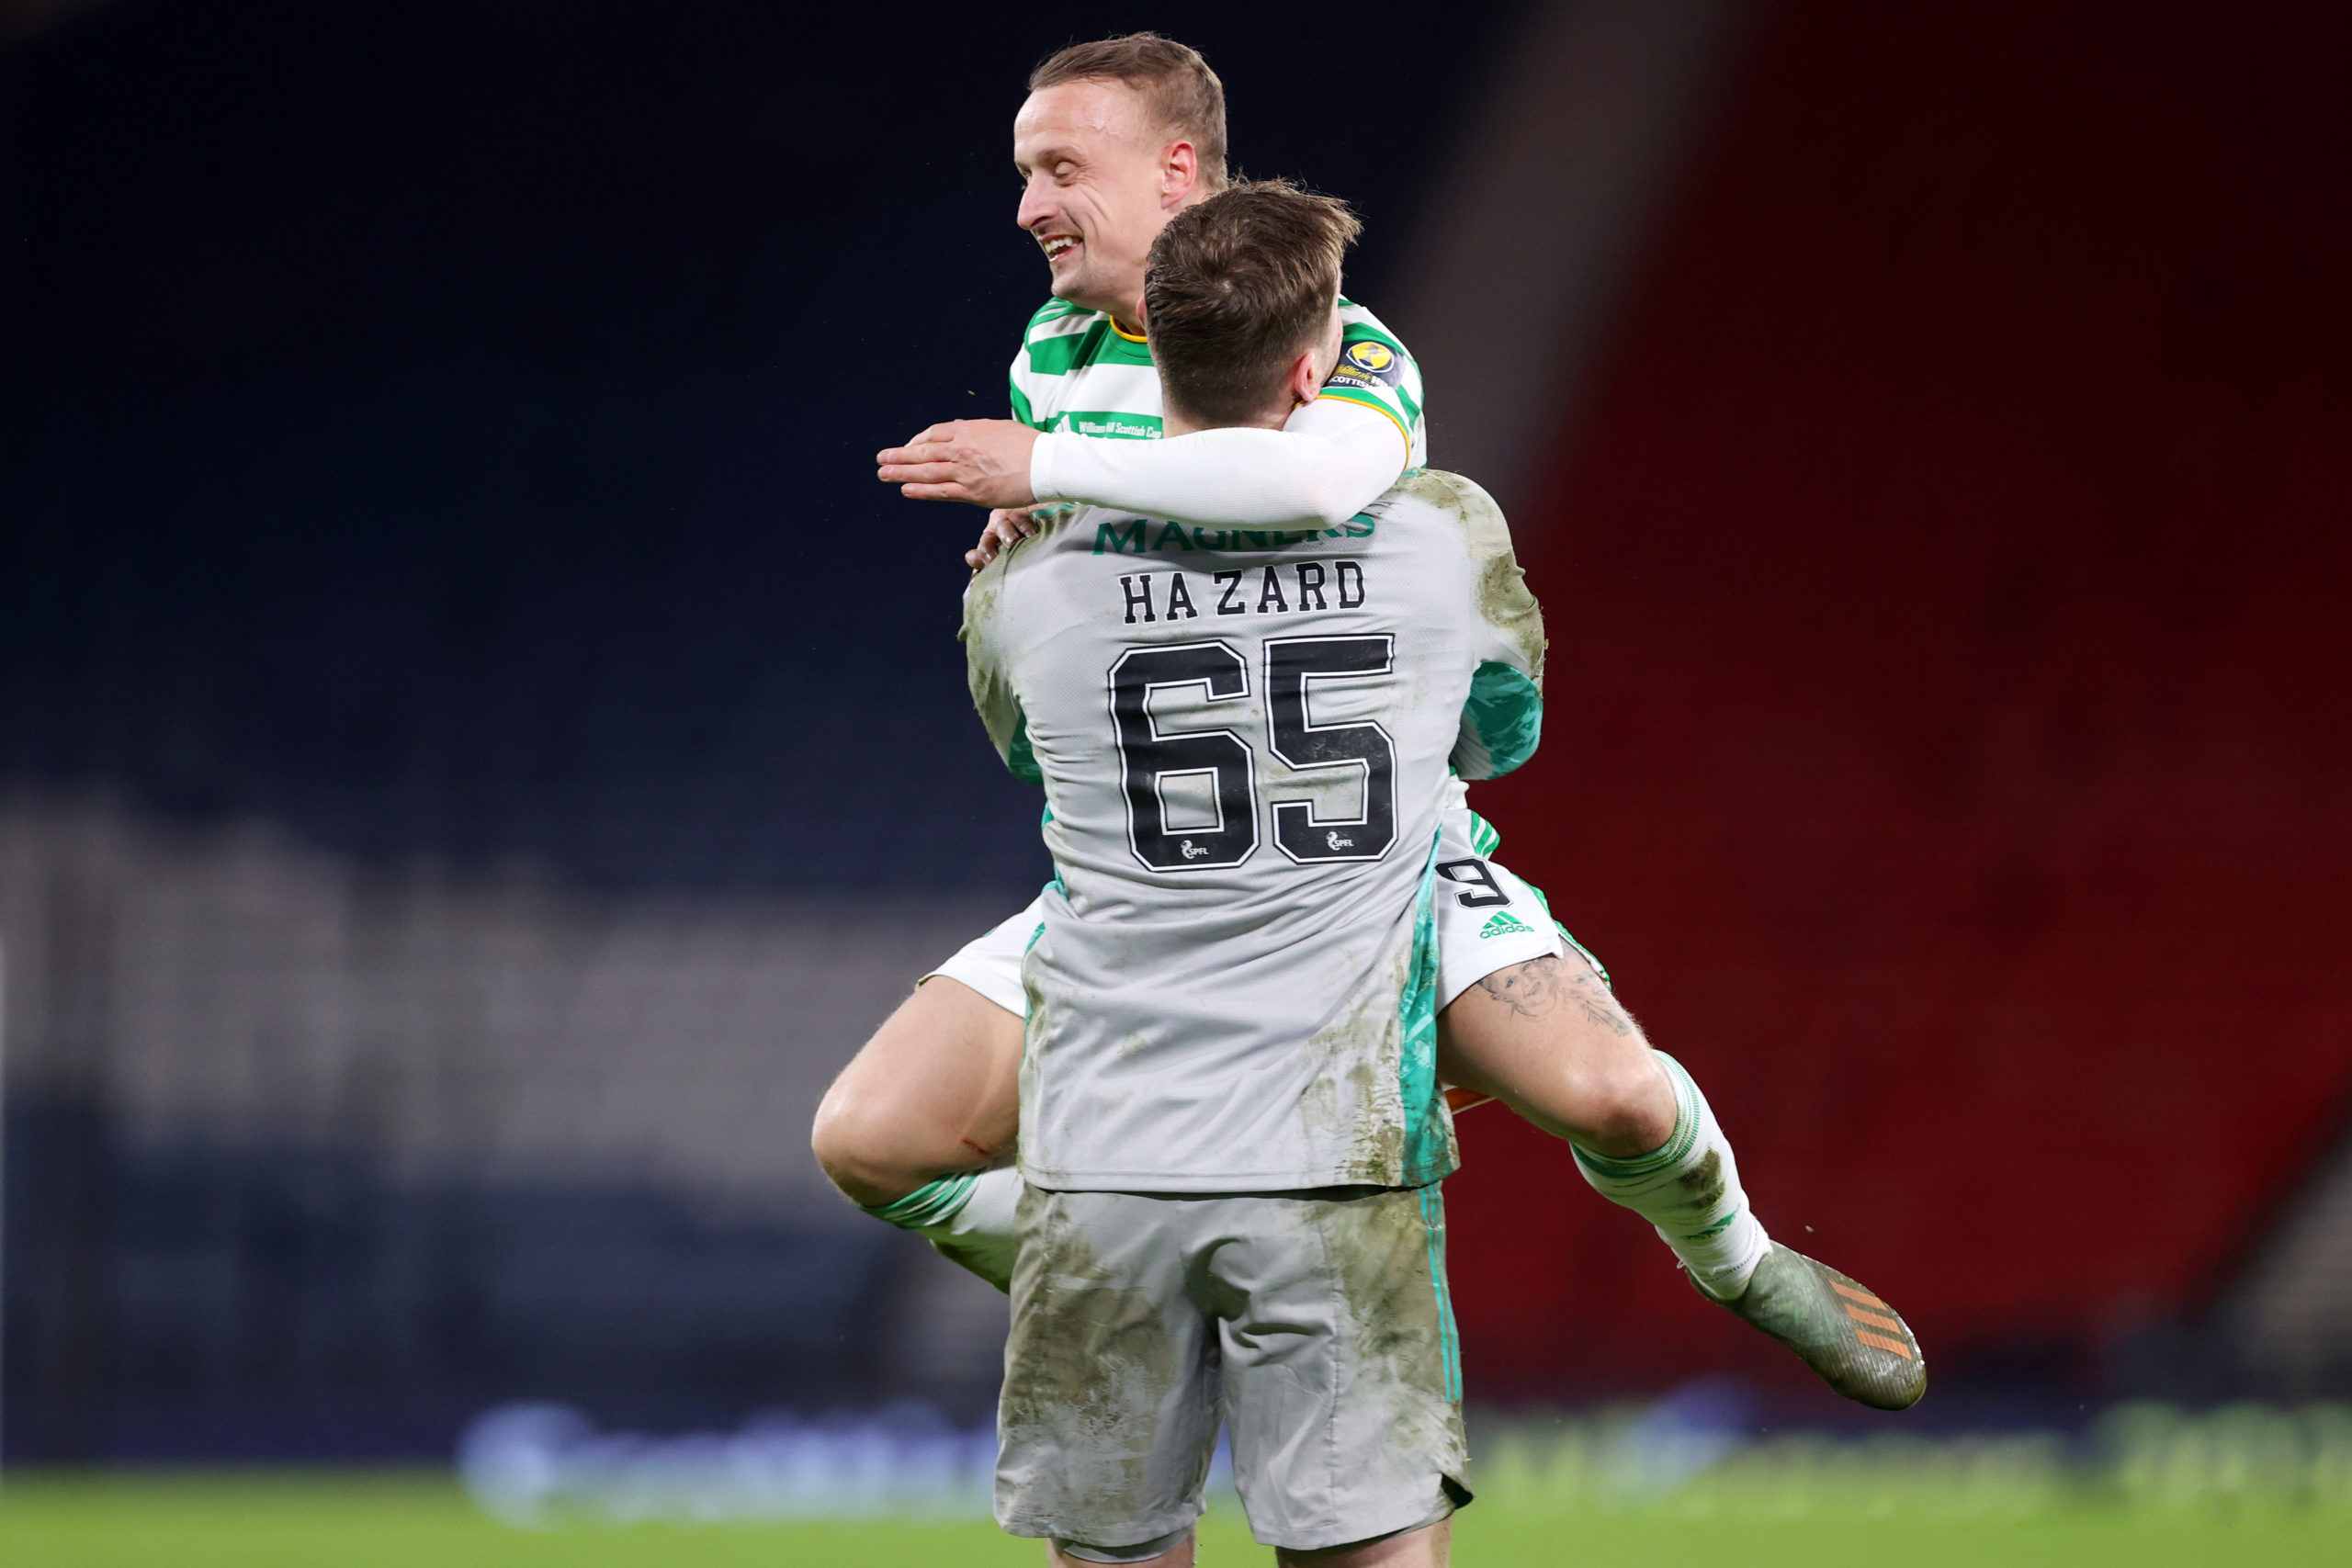 Celtic goalkeeper Conor Hazard might be onto something as he stakes claim for starting berth